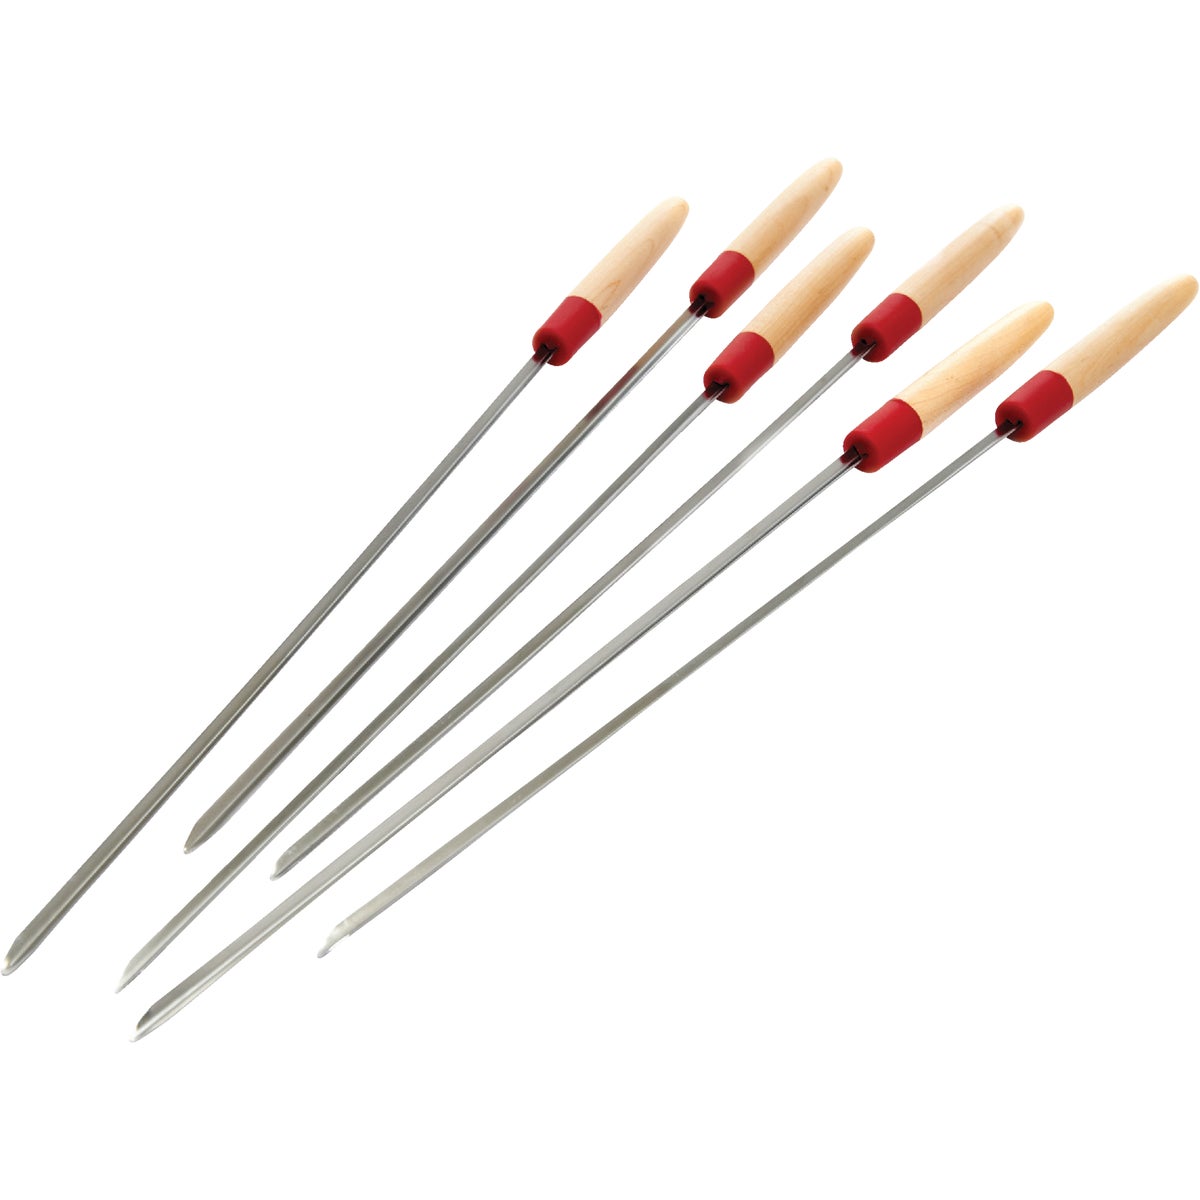 Item 800083, Set of 6 stainless steel skewers with wood handles and silicone bezels.